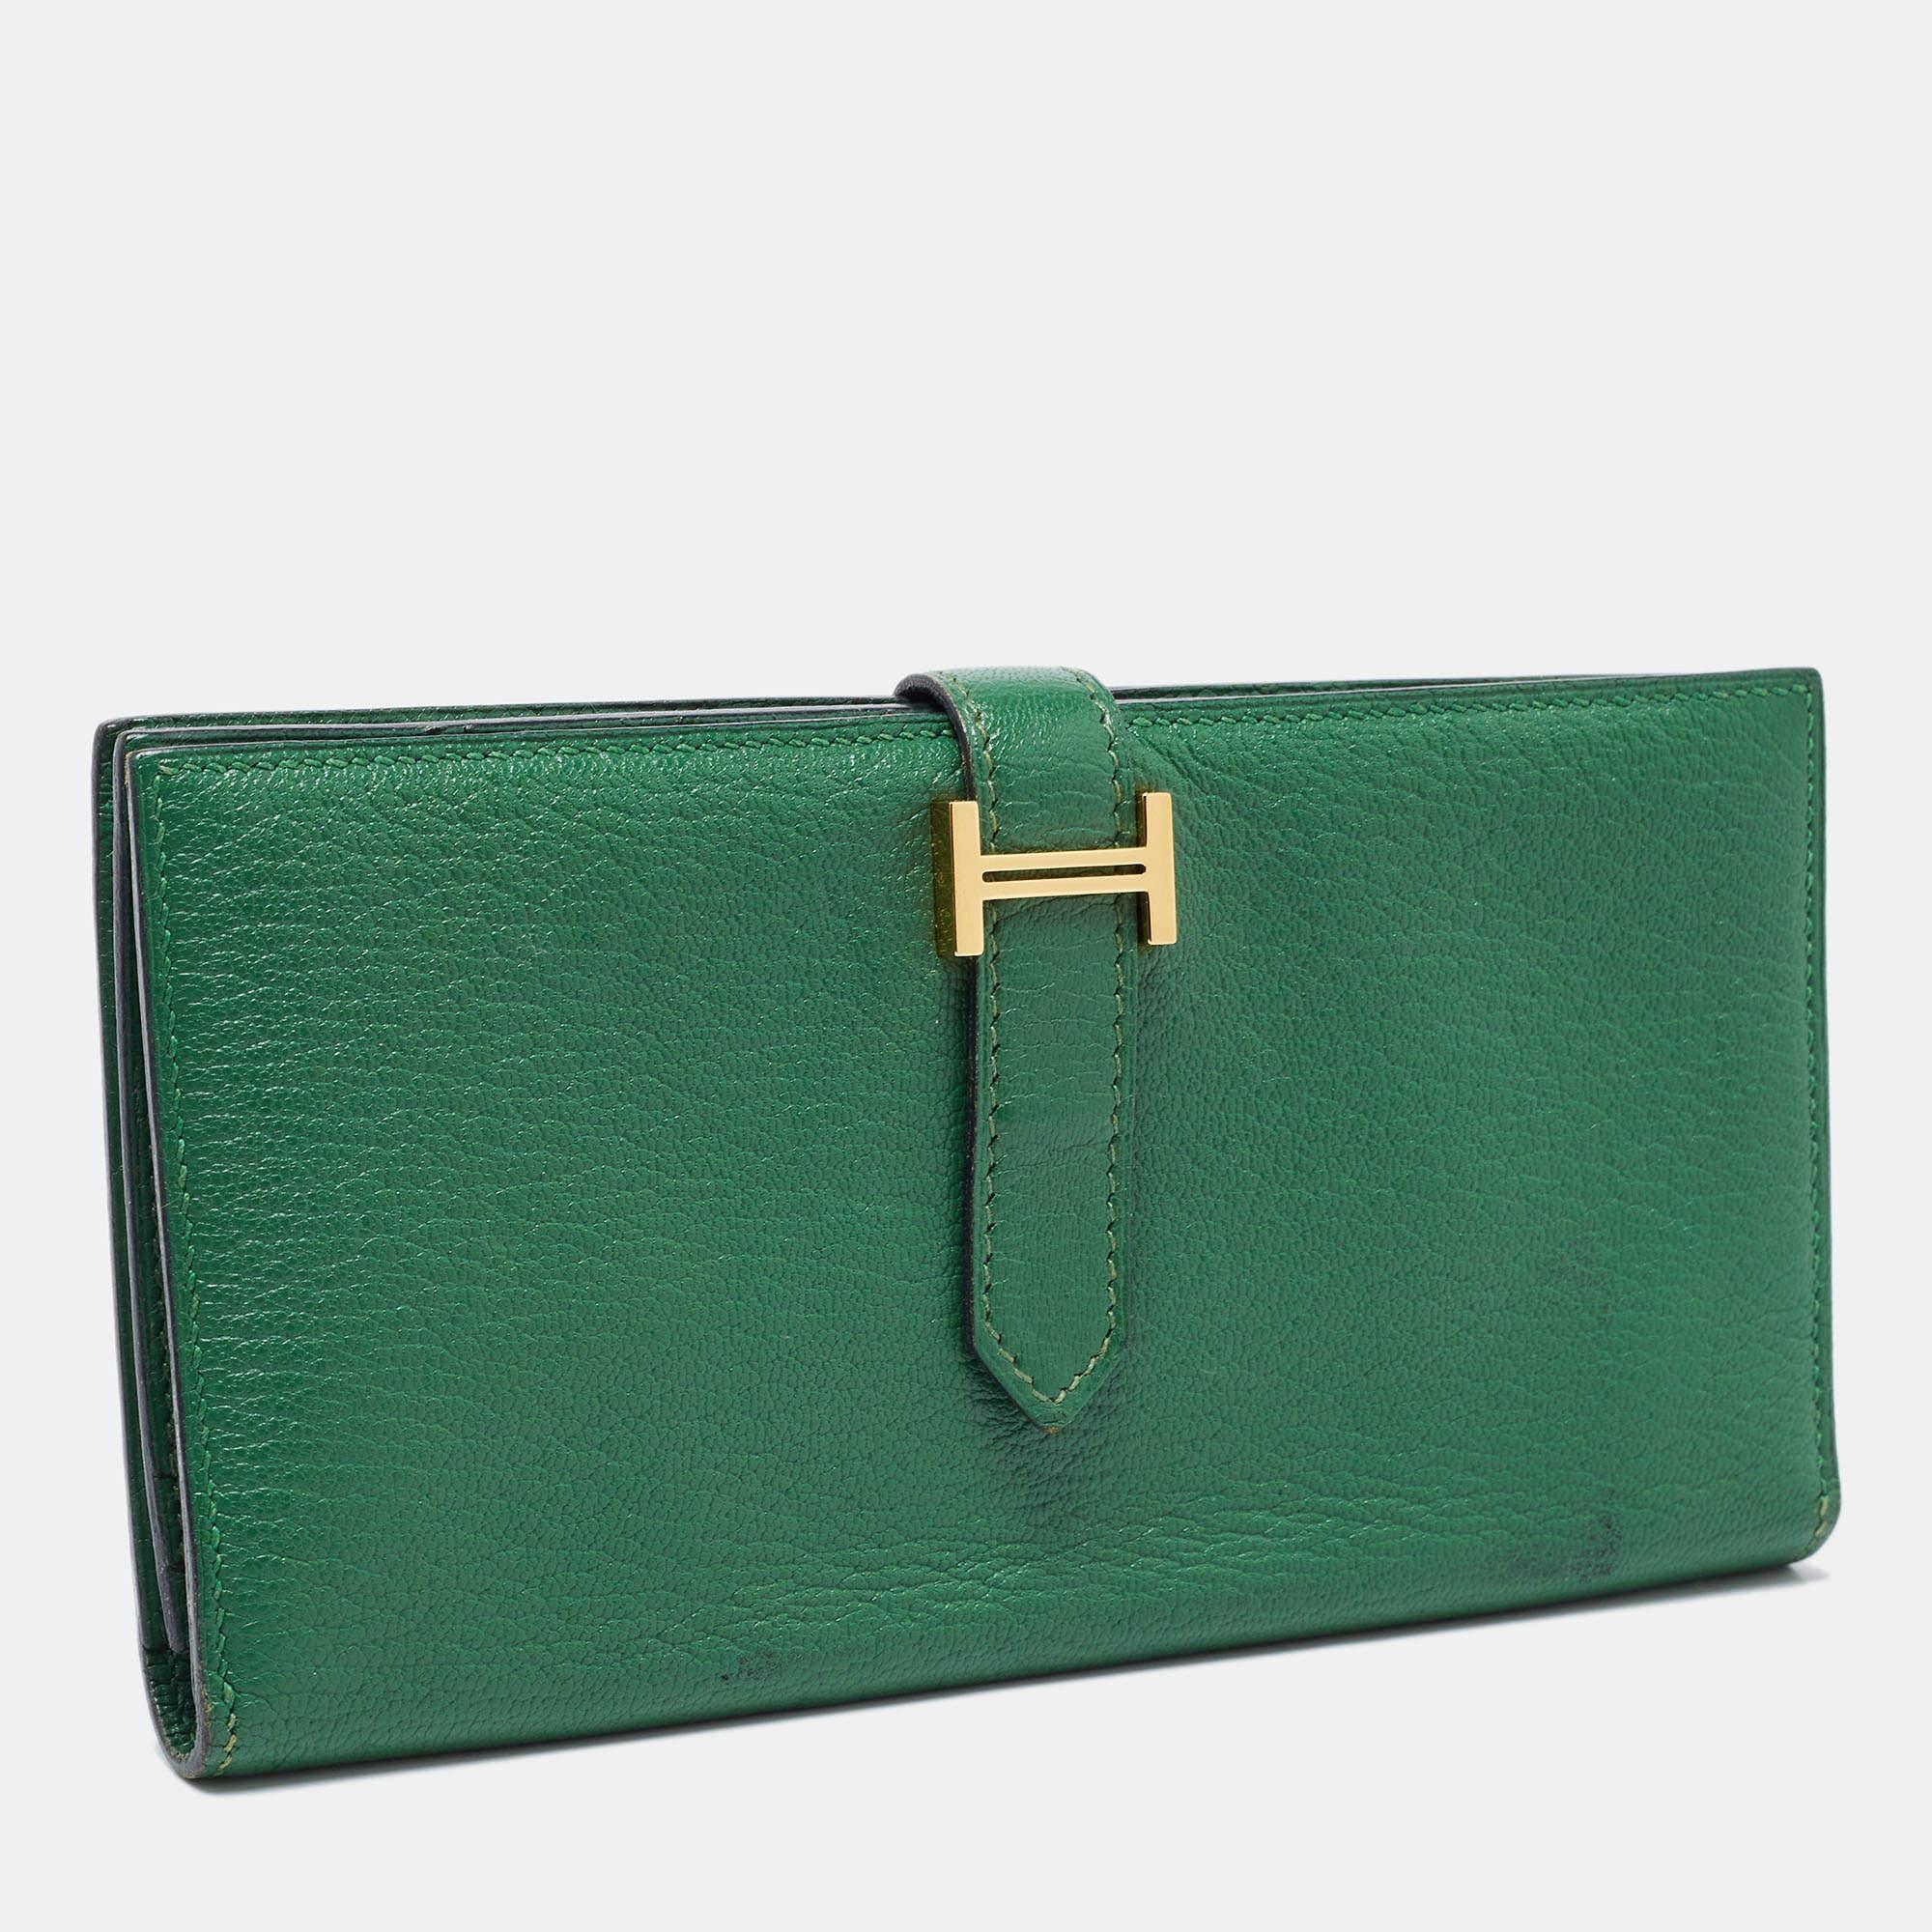 Luxuriously crafted by the House of Hermés, this stunning Bearn Gusset wallet is a must-have accessory for luxury fashion lovers. This wallet carries an elegant appeal and a sleek silhouette. It is made using Vert Bengal Chevre leather on the